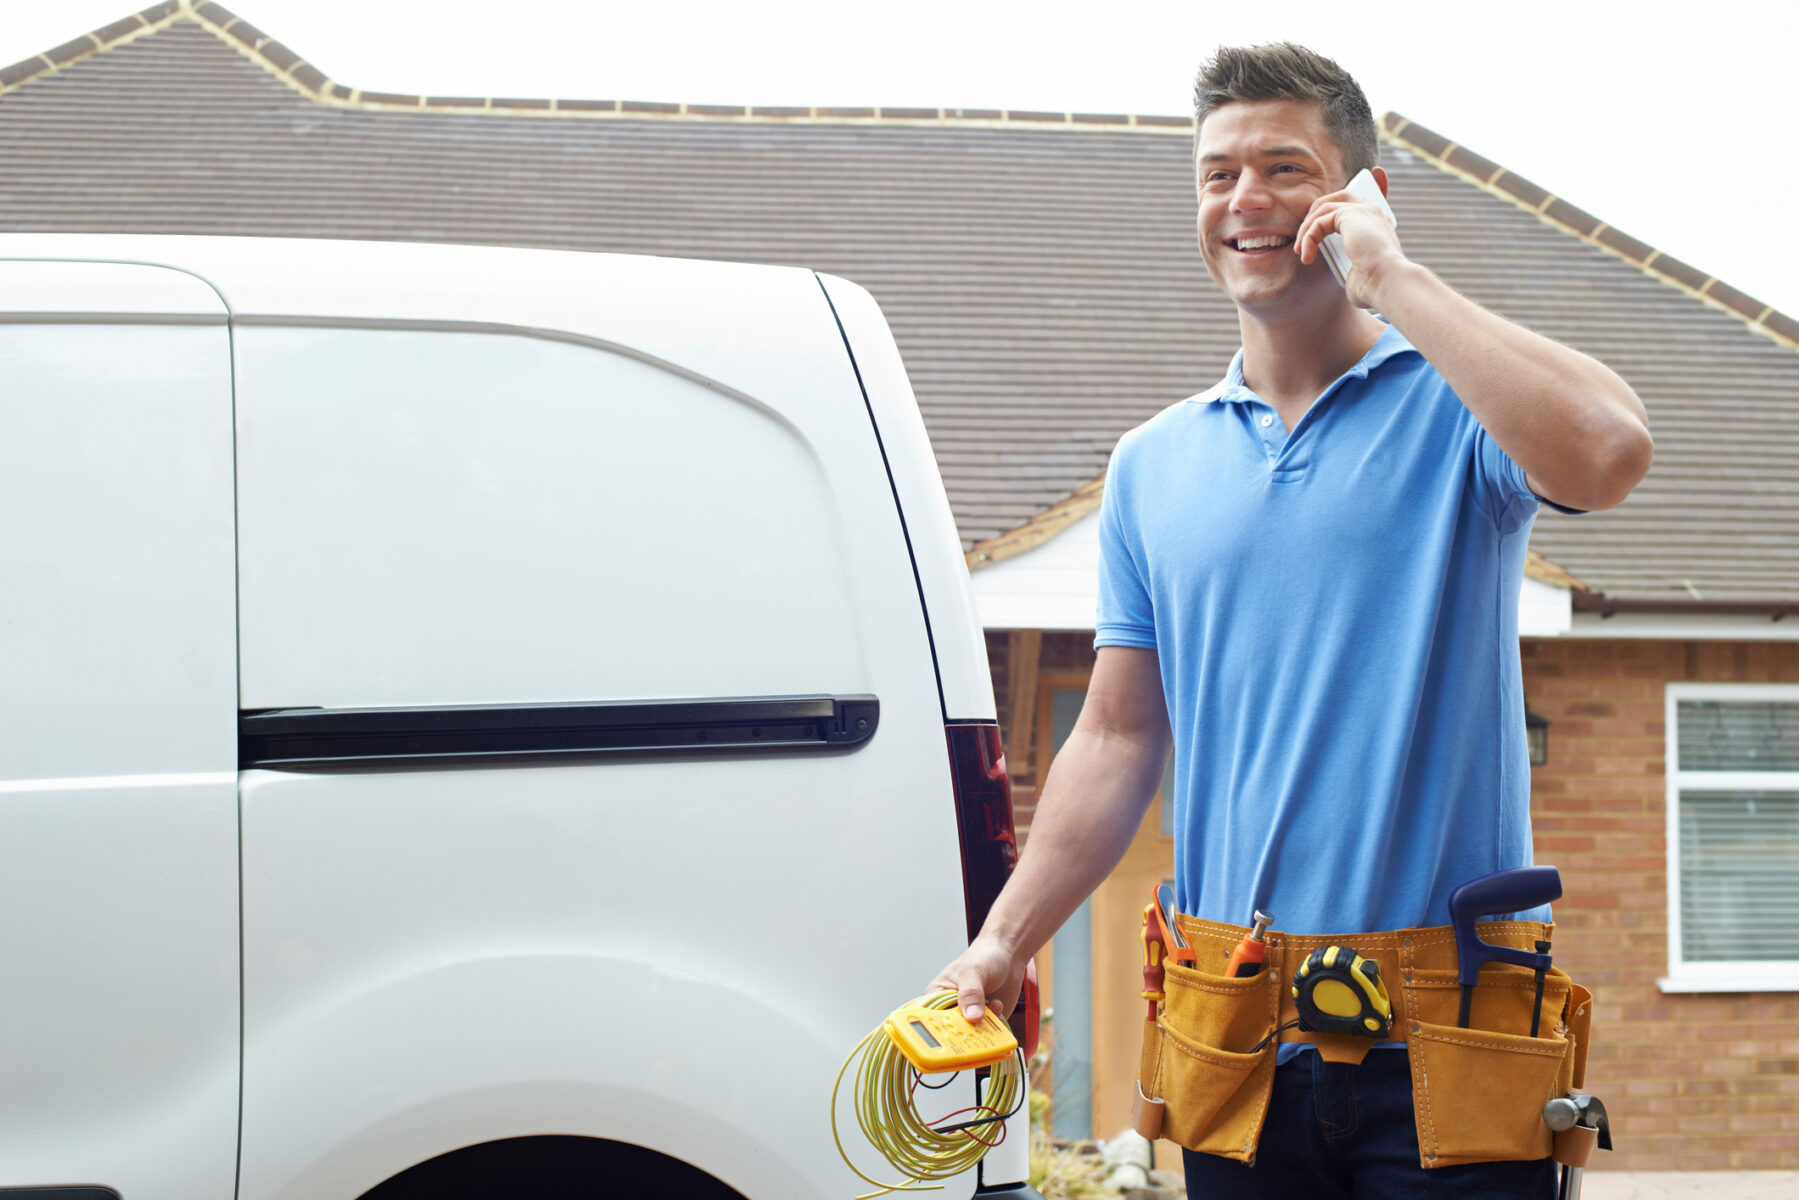 HVAC technician on the phone next to a white work truck in a residential area